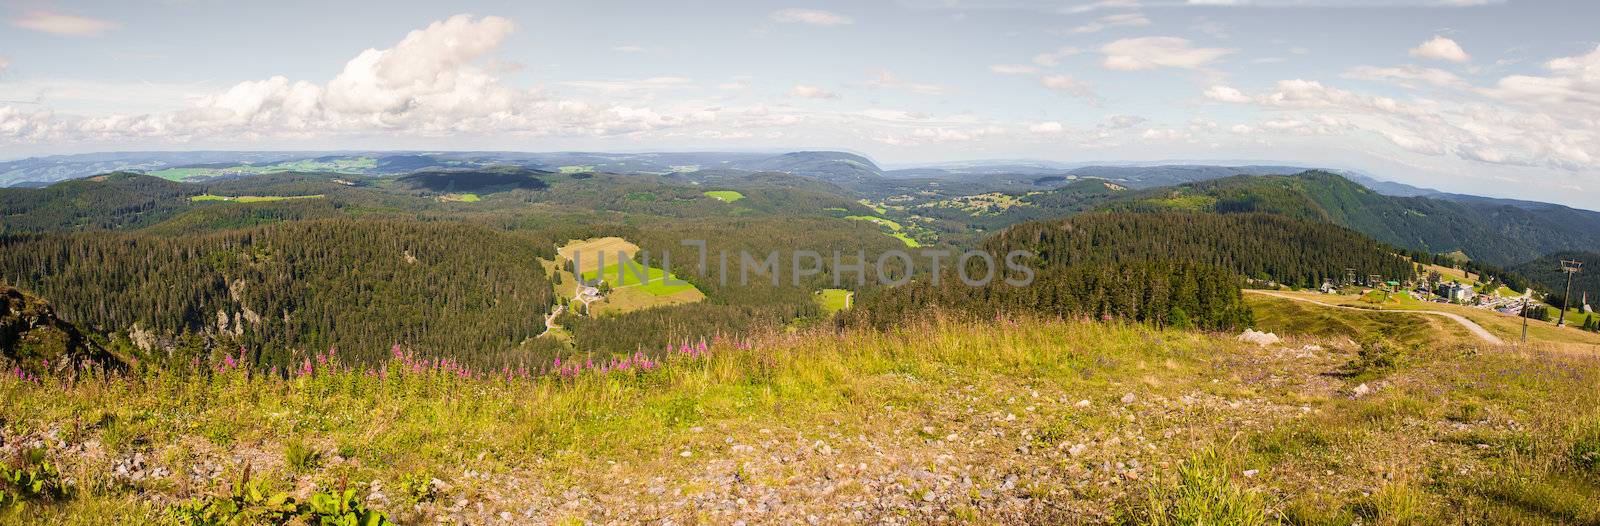 Panorama landscape view over black forest Germany by Havana